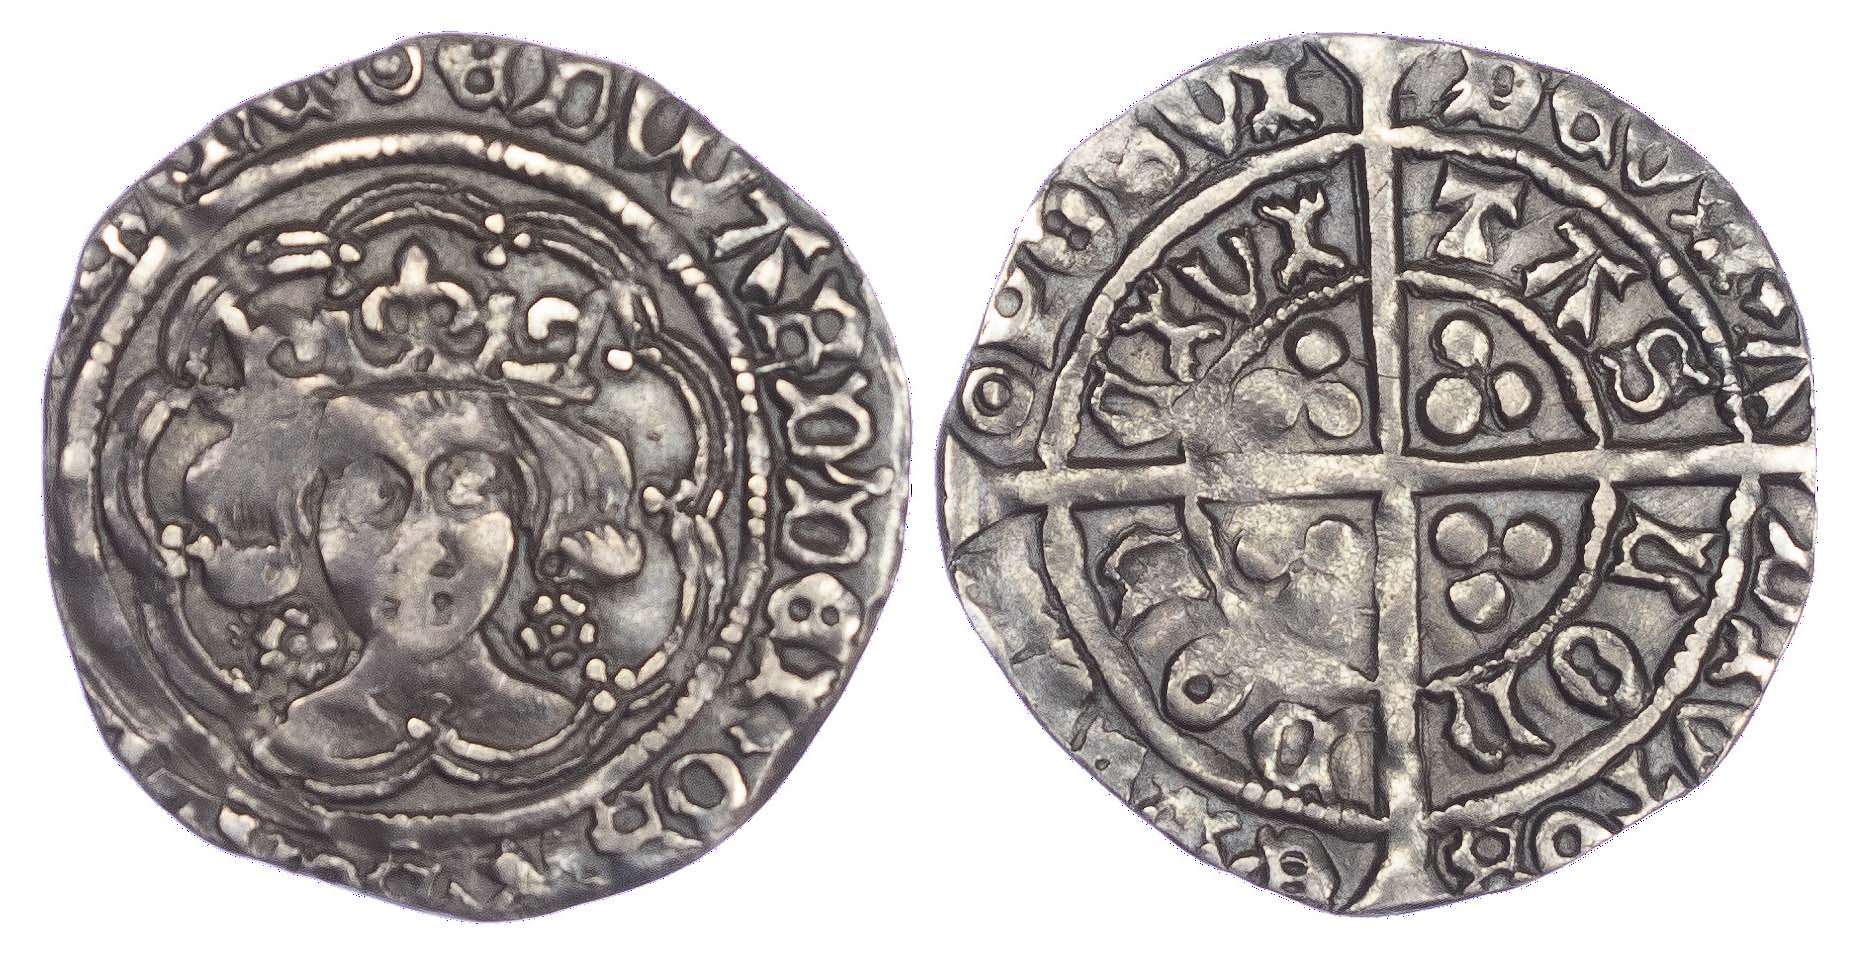 Edward IV (1471-83), second reign, Groat, Roses by bust, London mint